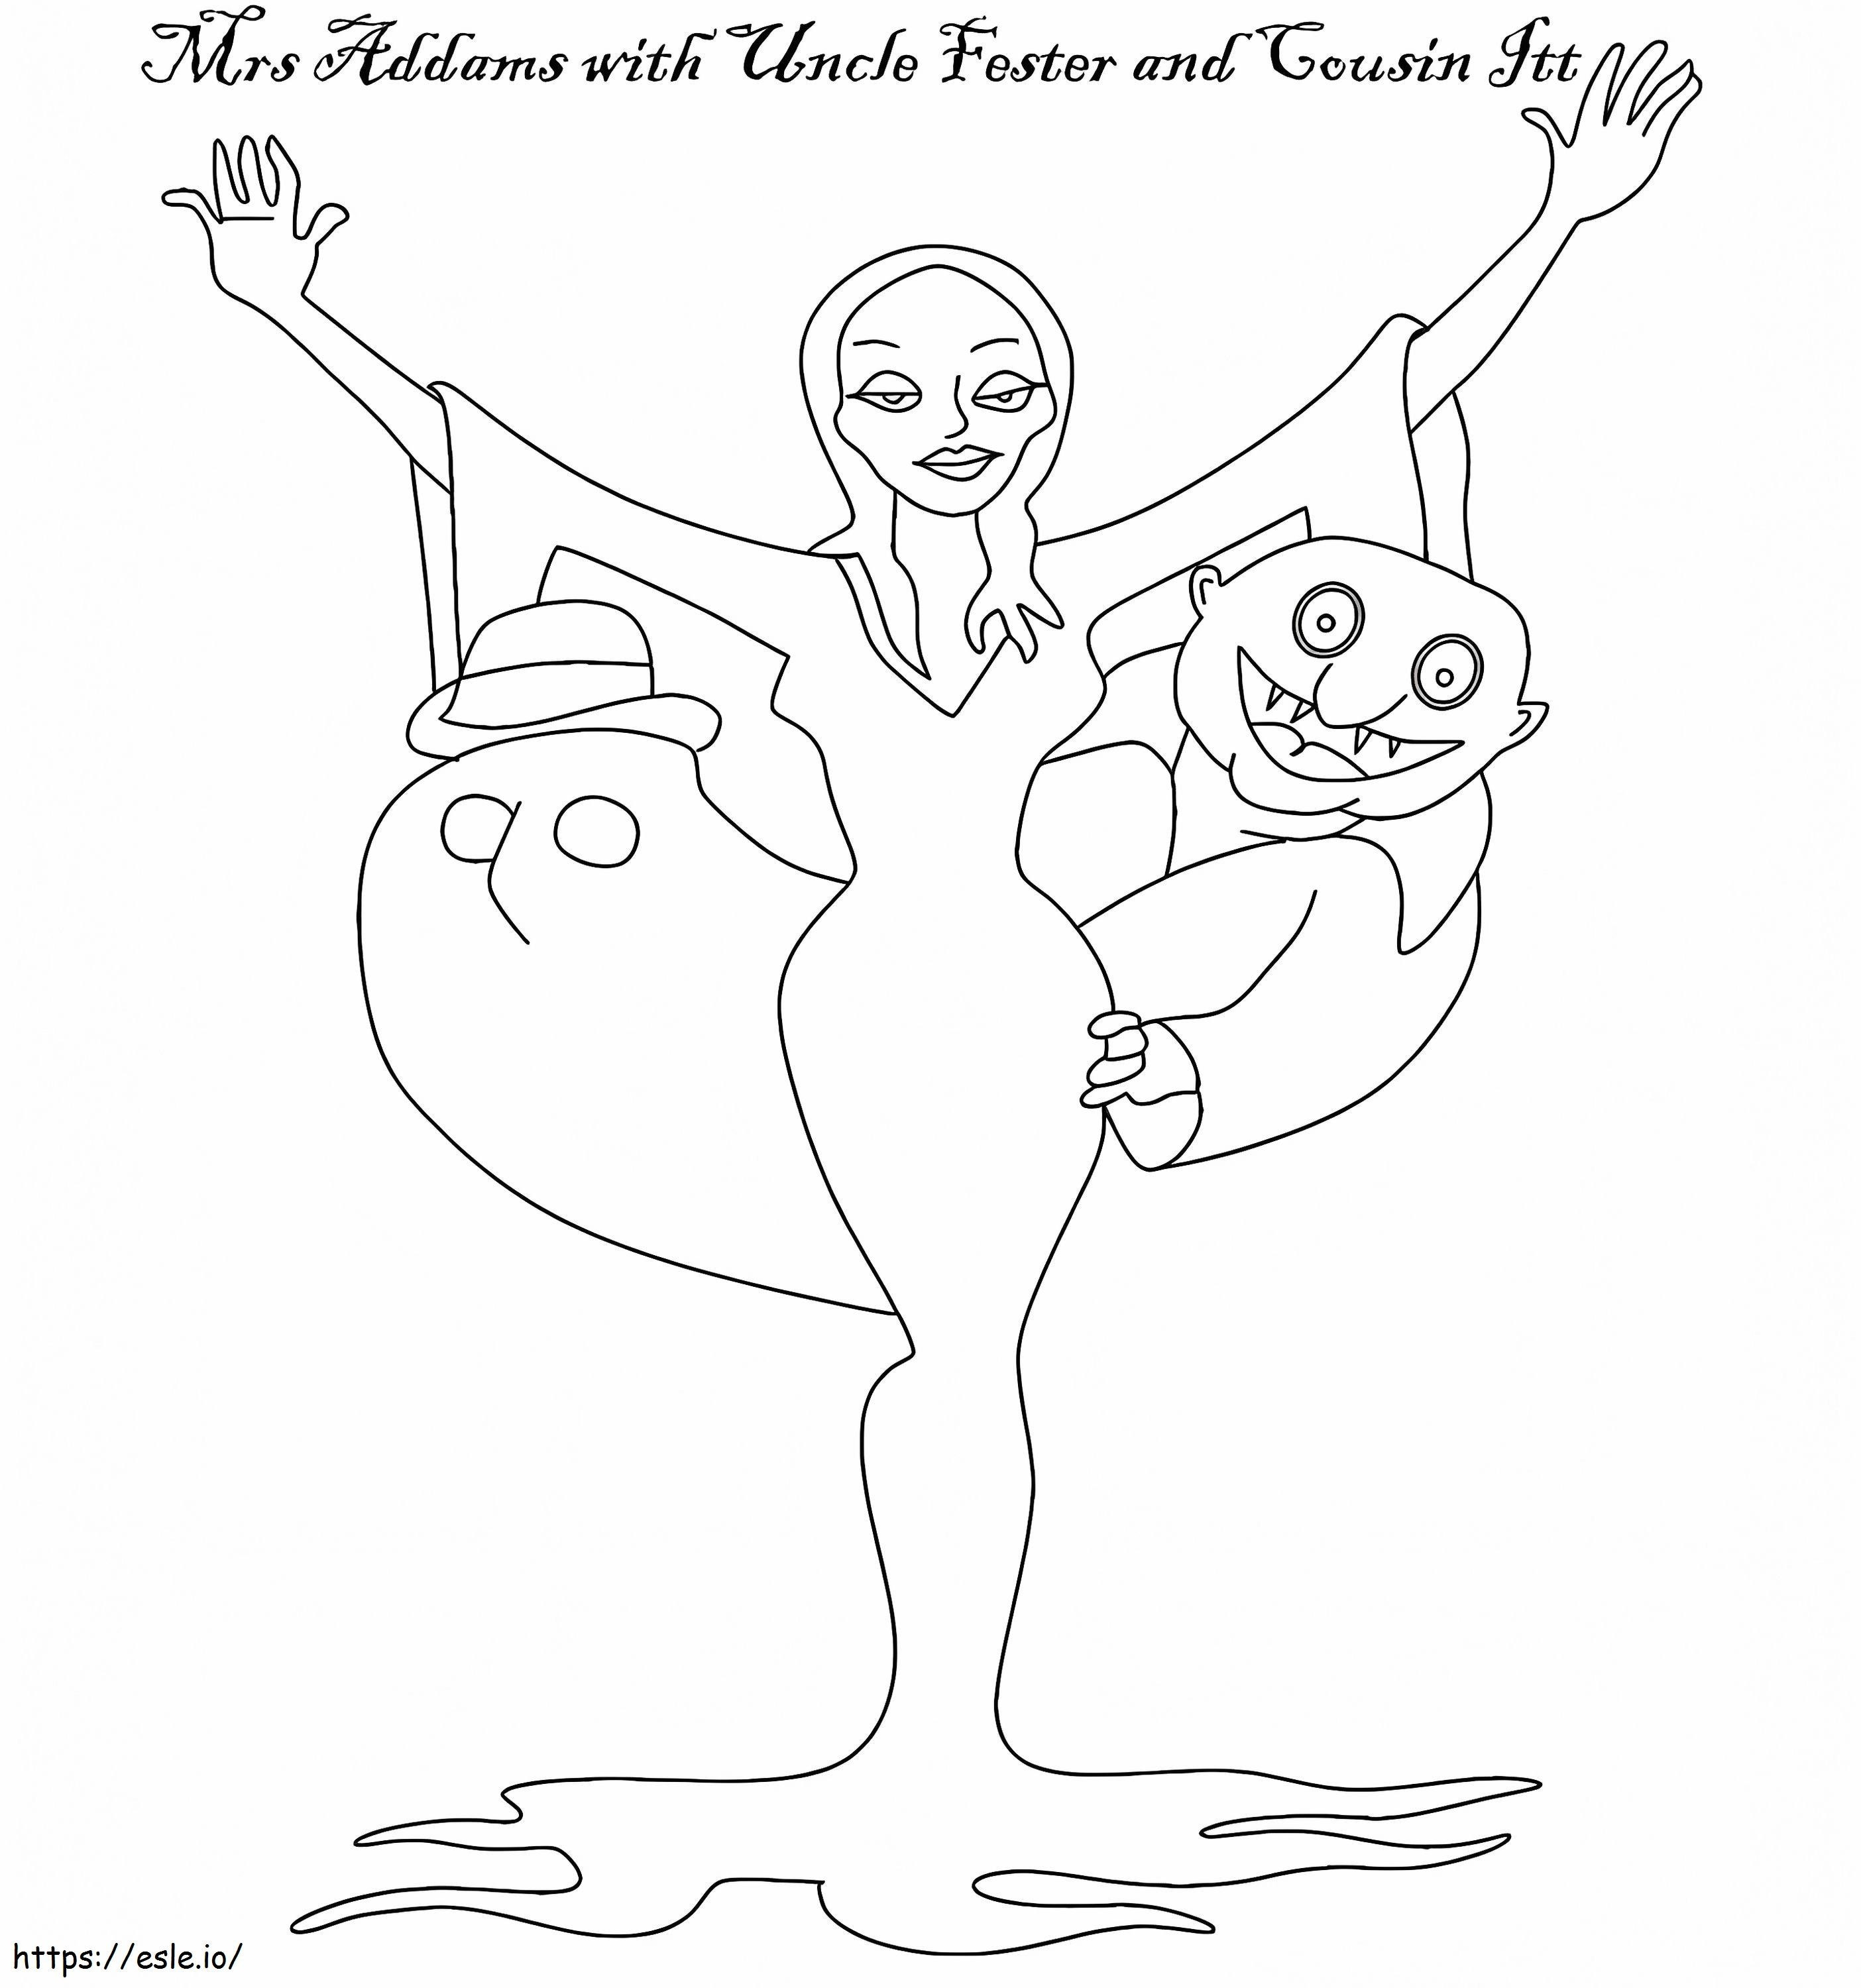 The Addams Family 5 coloring page